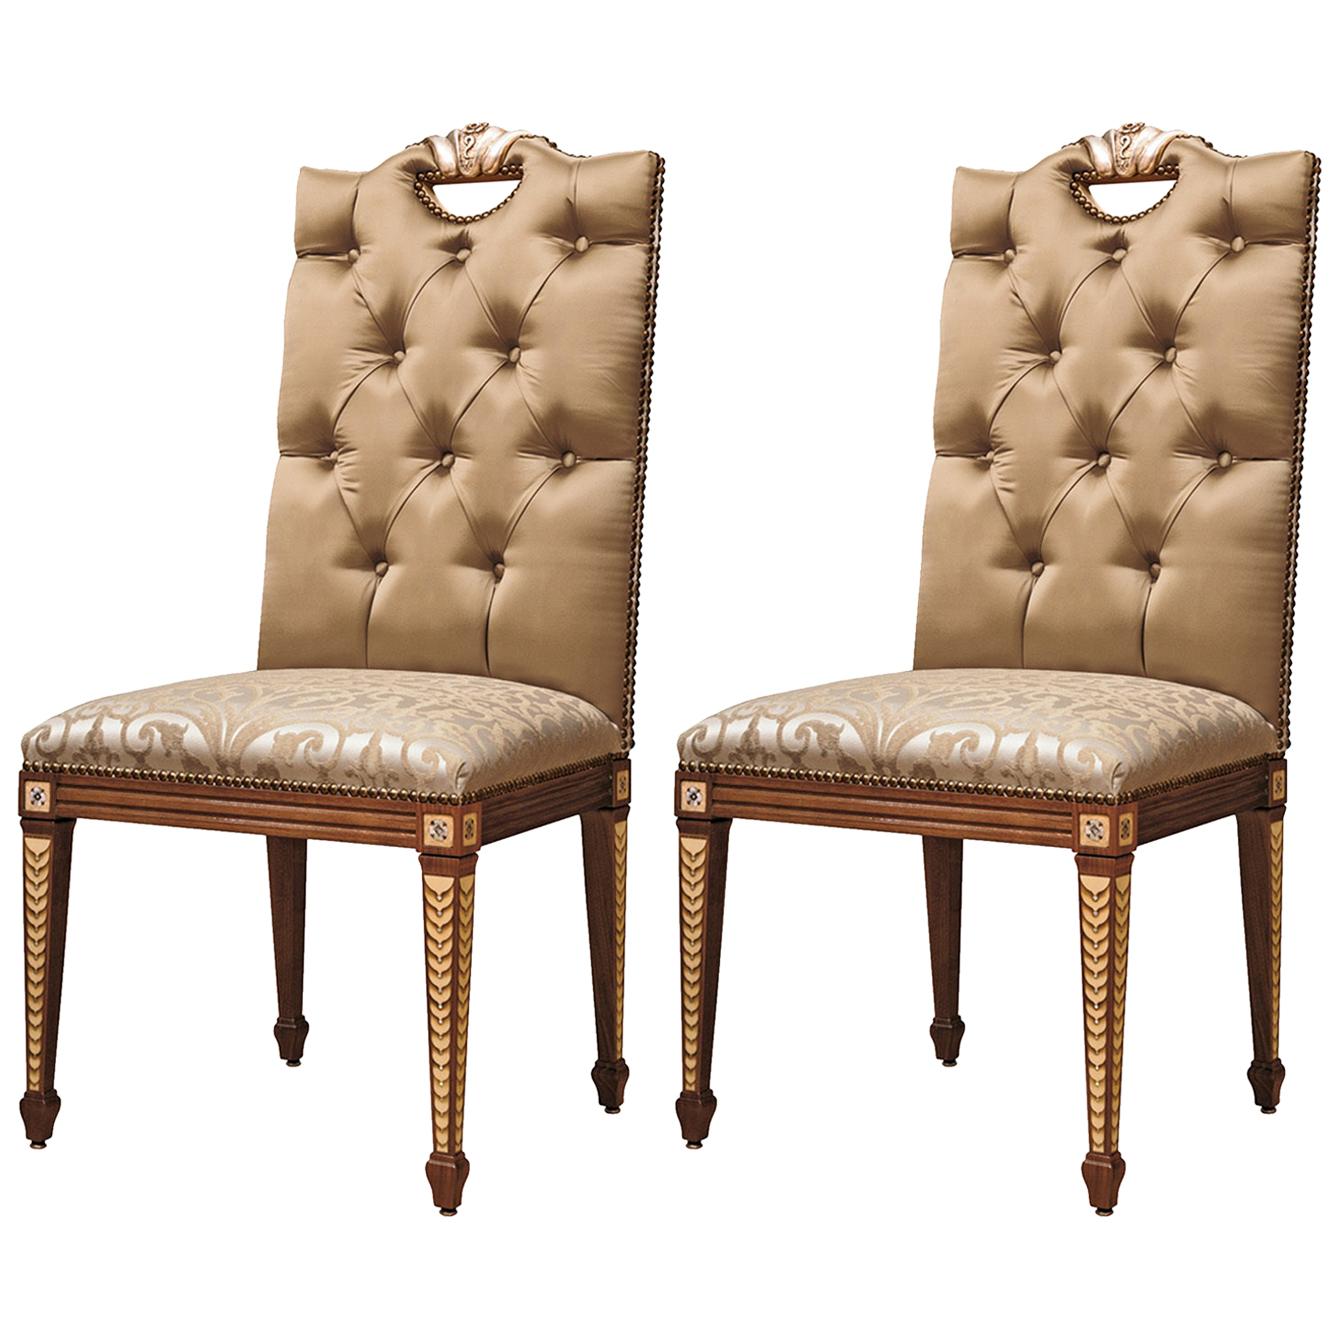 Set of 2 Upholstered Walnut Chairs